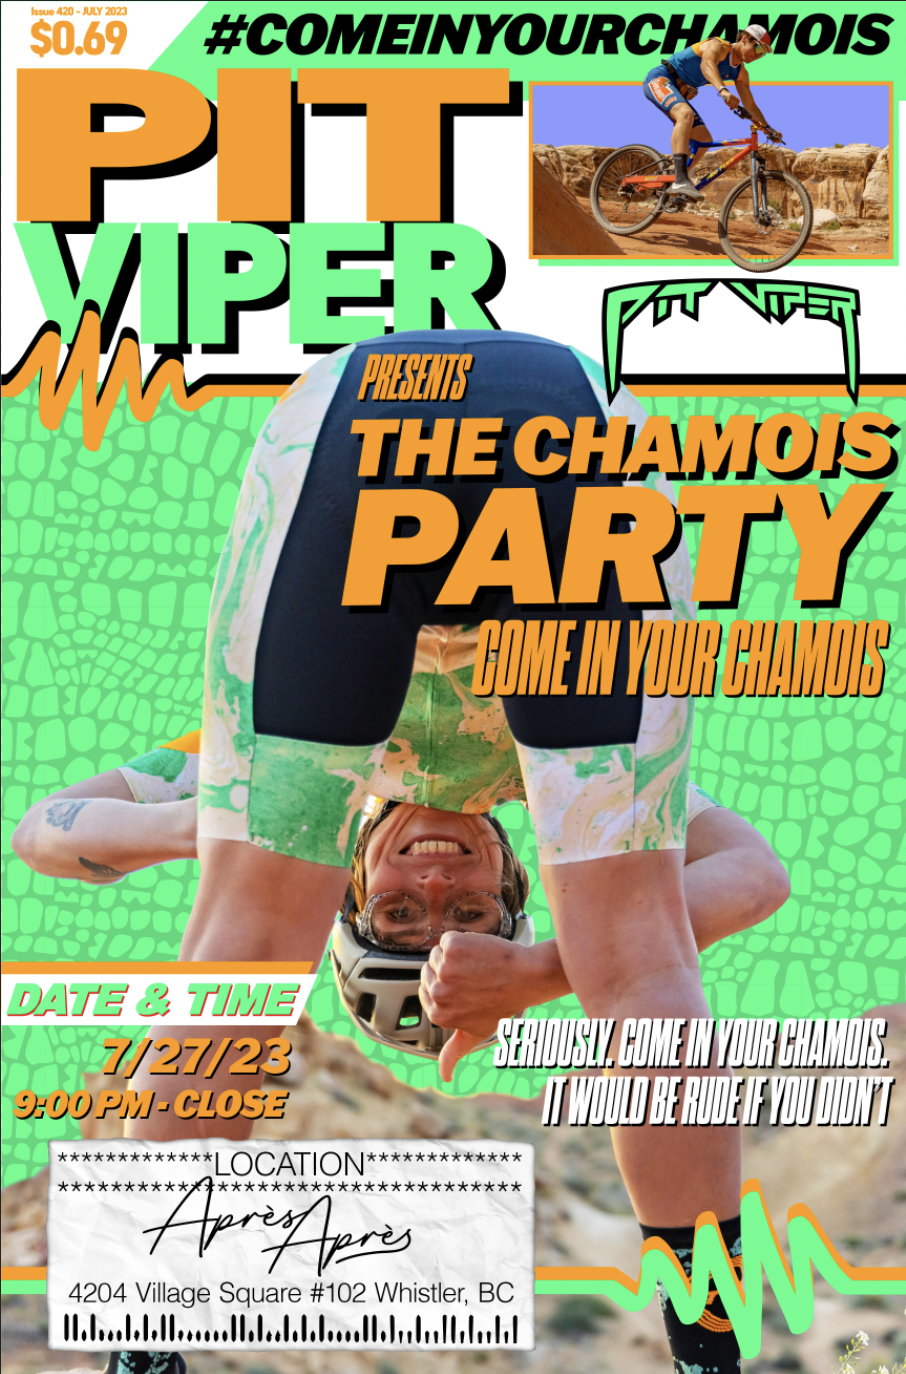 Pit Viper Presents Come in Your Chamois